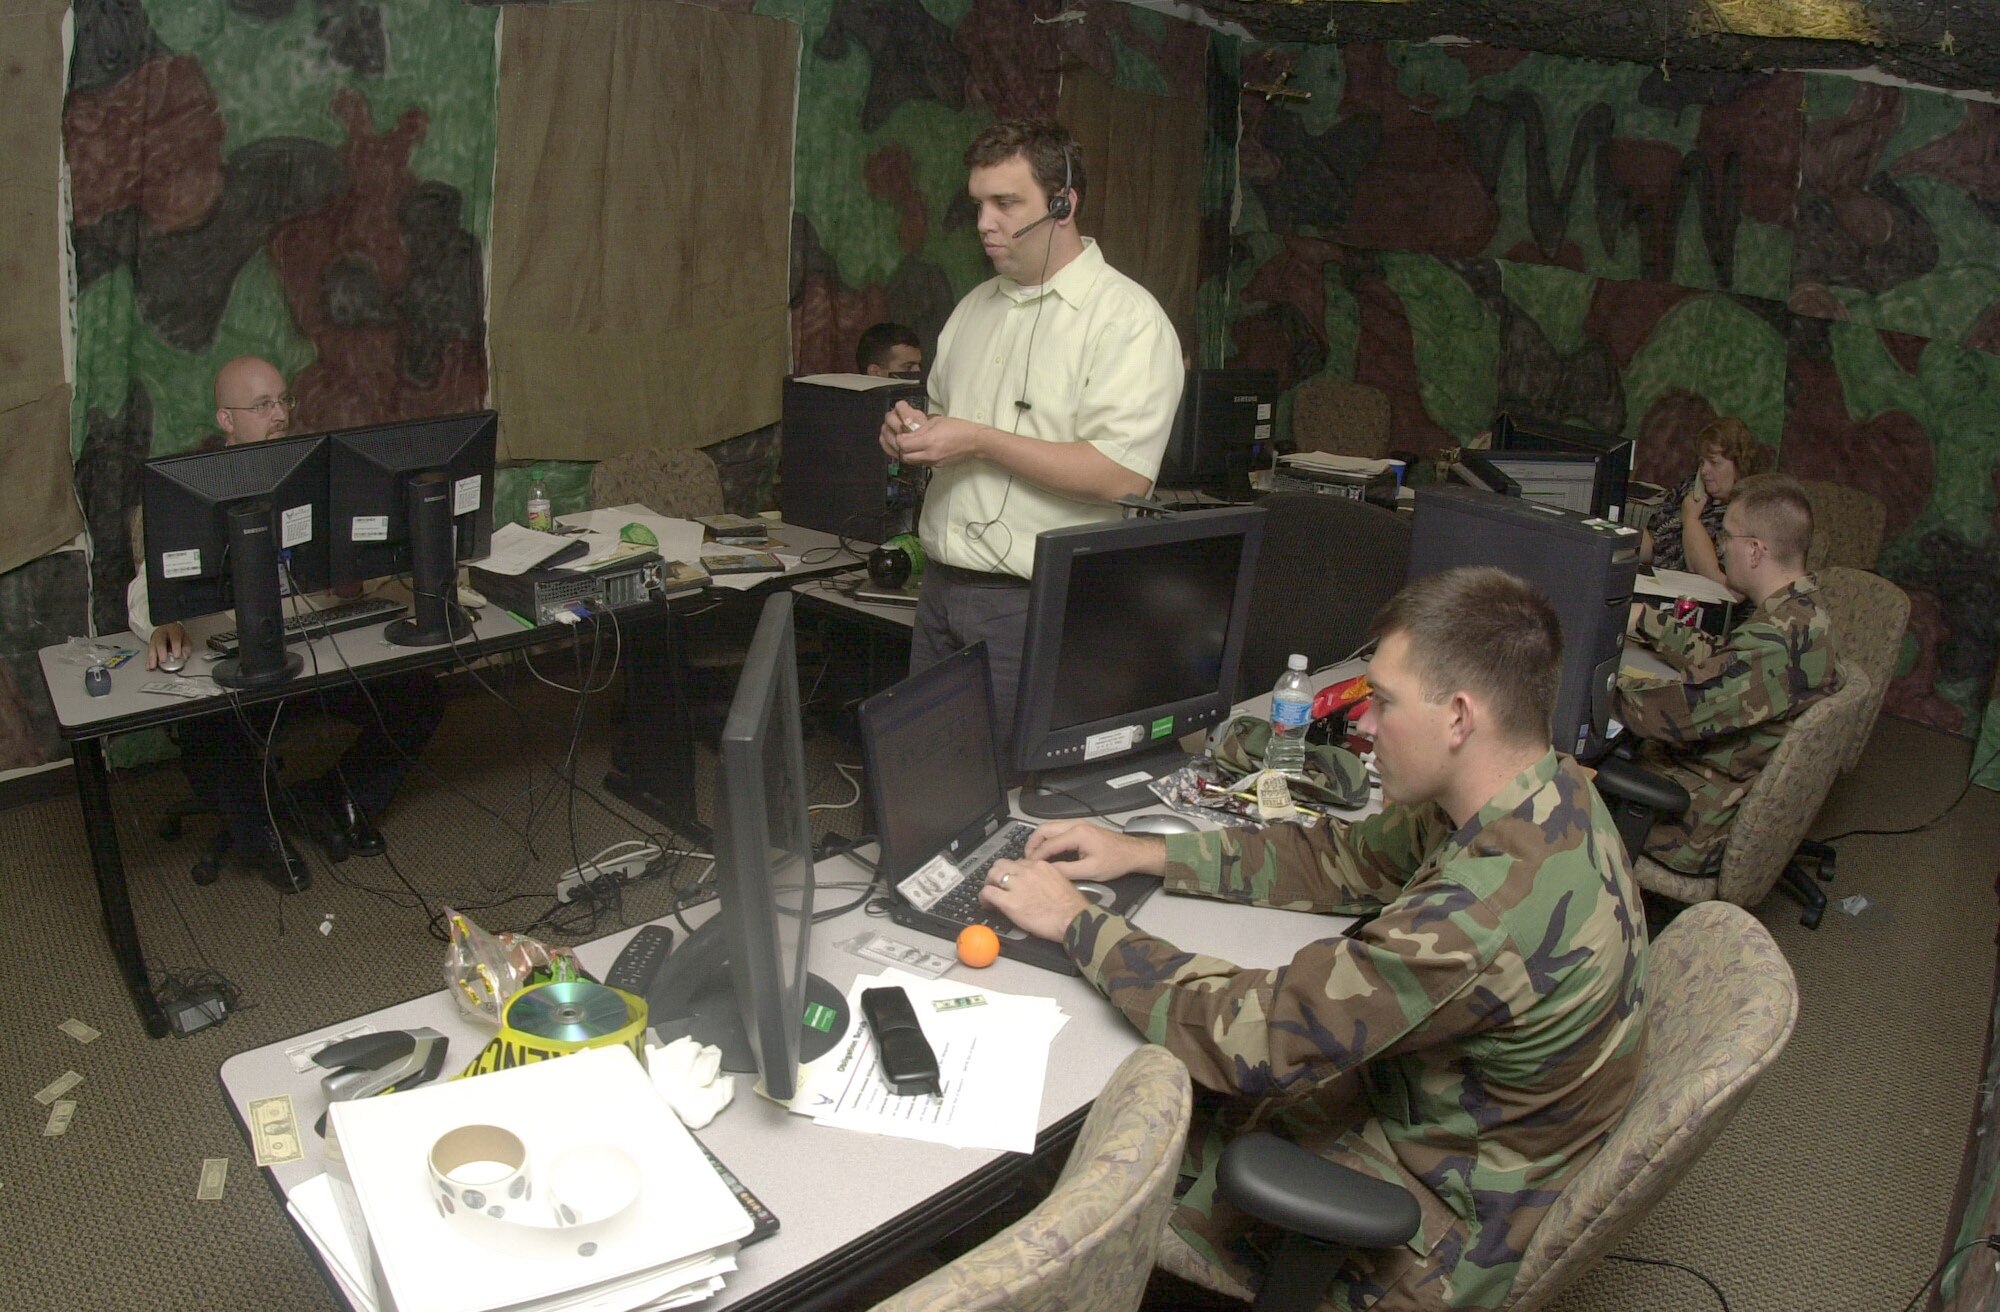 Cory Lelek (far left), Jimmy Phillips (center wearing headset), 1st Lt. Ross Davis (typing on laptop at bottom right) and other members of the 17th Comptroller Squadron financial analysis flight work hard during the 2007 End-of-Year closeout Sept. 28, 2007. The 17 CPTS conference room was transformed into a "War Room" for the closeout. (U.S. Air Force photo by Senior Airman Luis Loza Gutierrez)